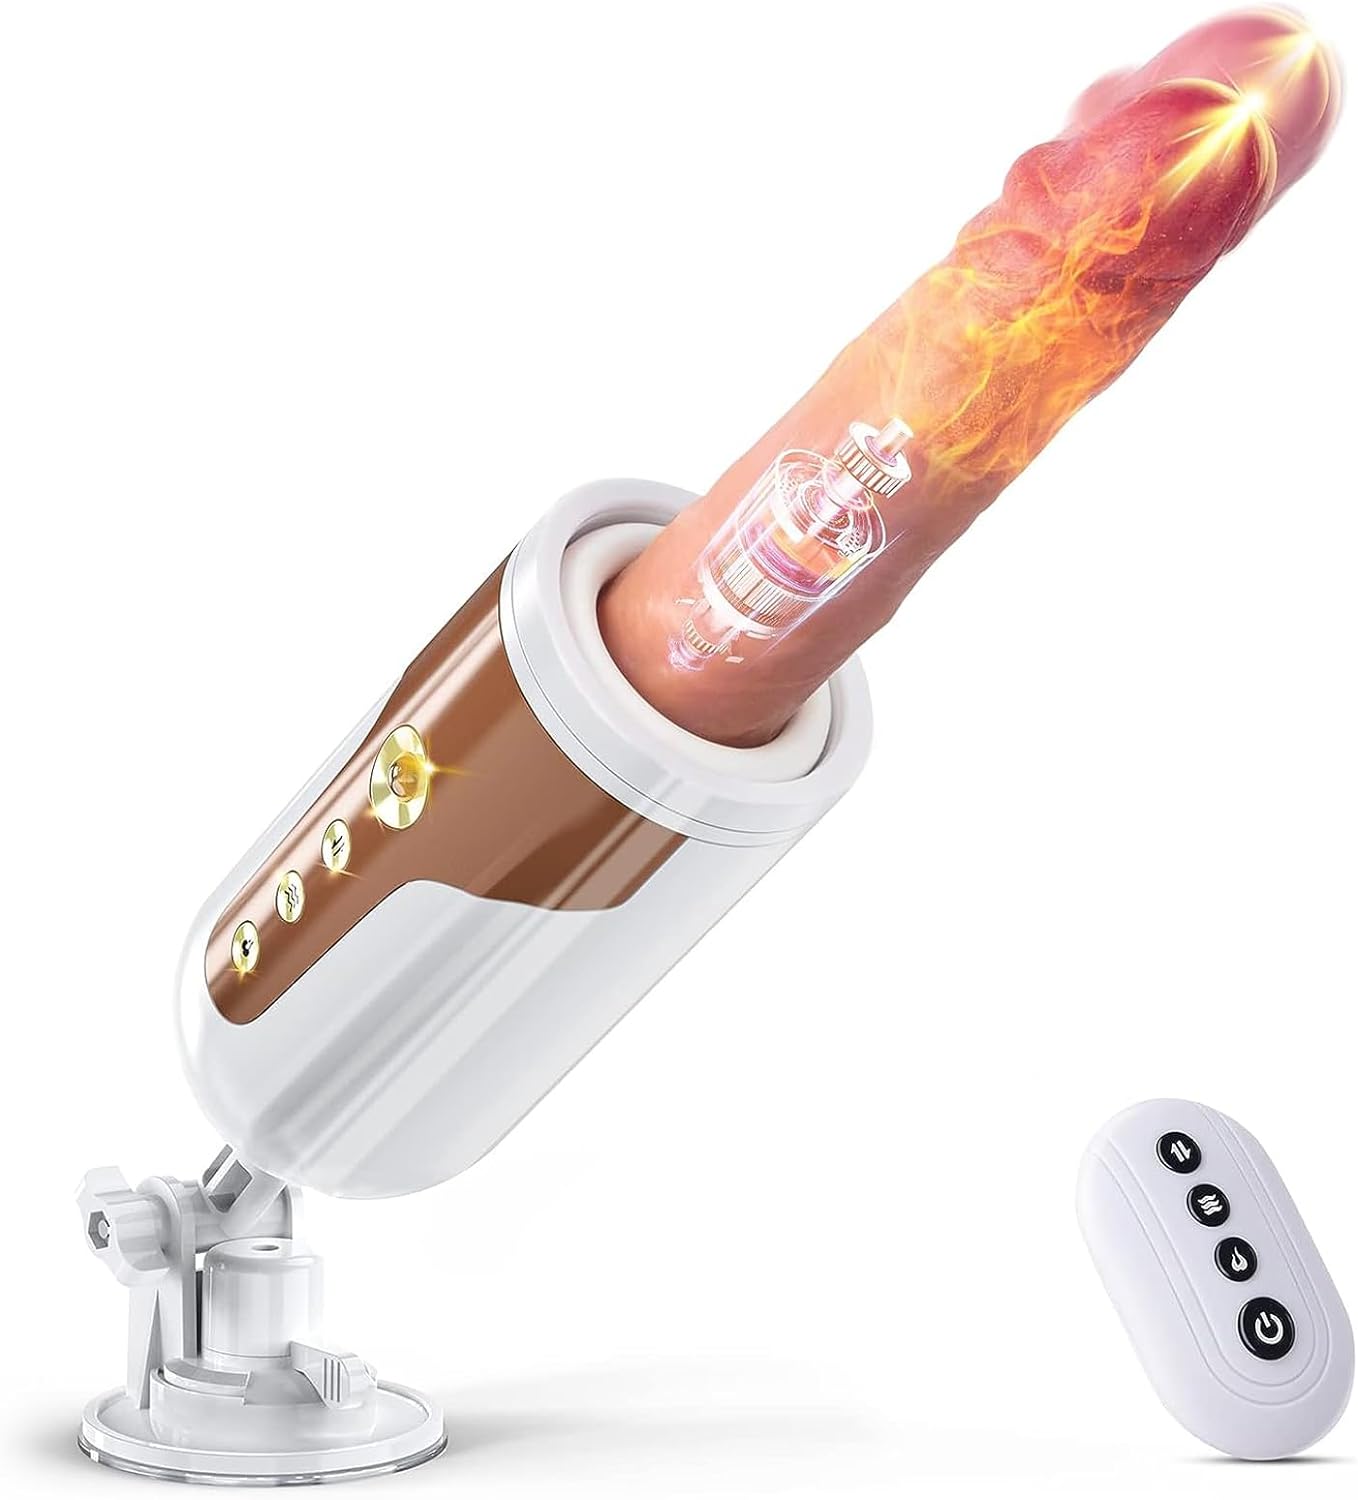 Automatic Thrusting Dildo Animour Love Machine Toy for Women and Men